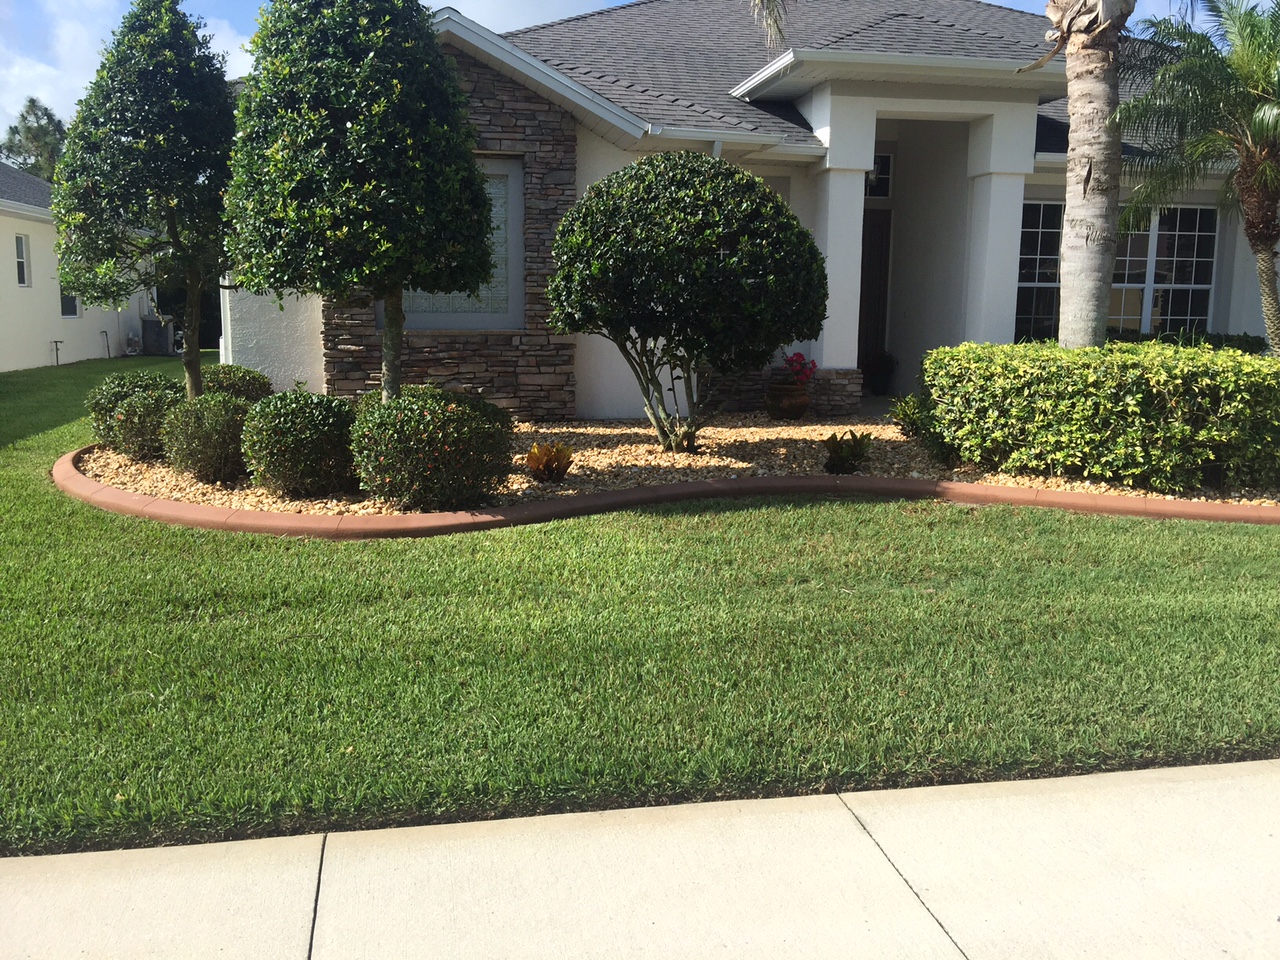 Druse Landscaping And Tree Services LLC Photo